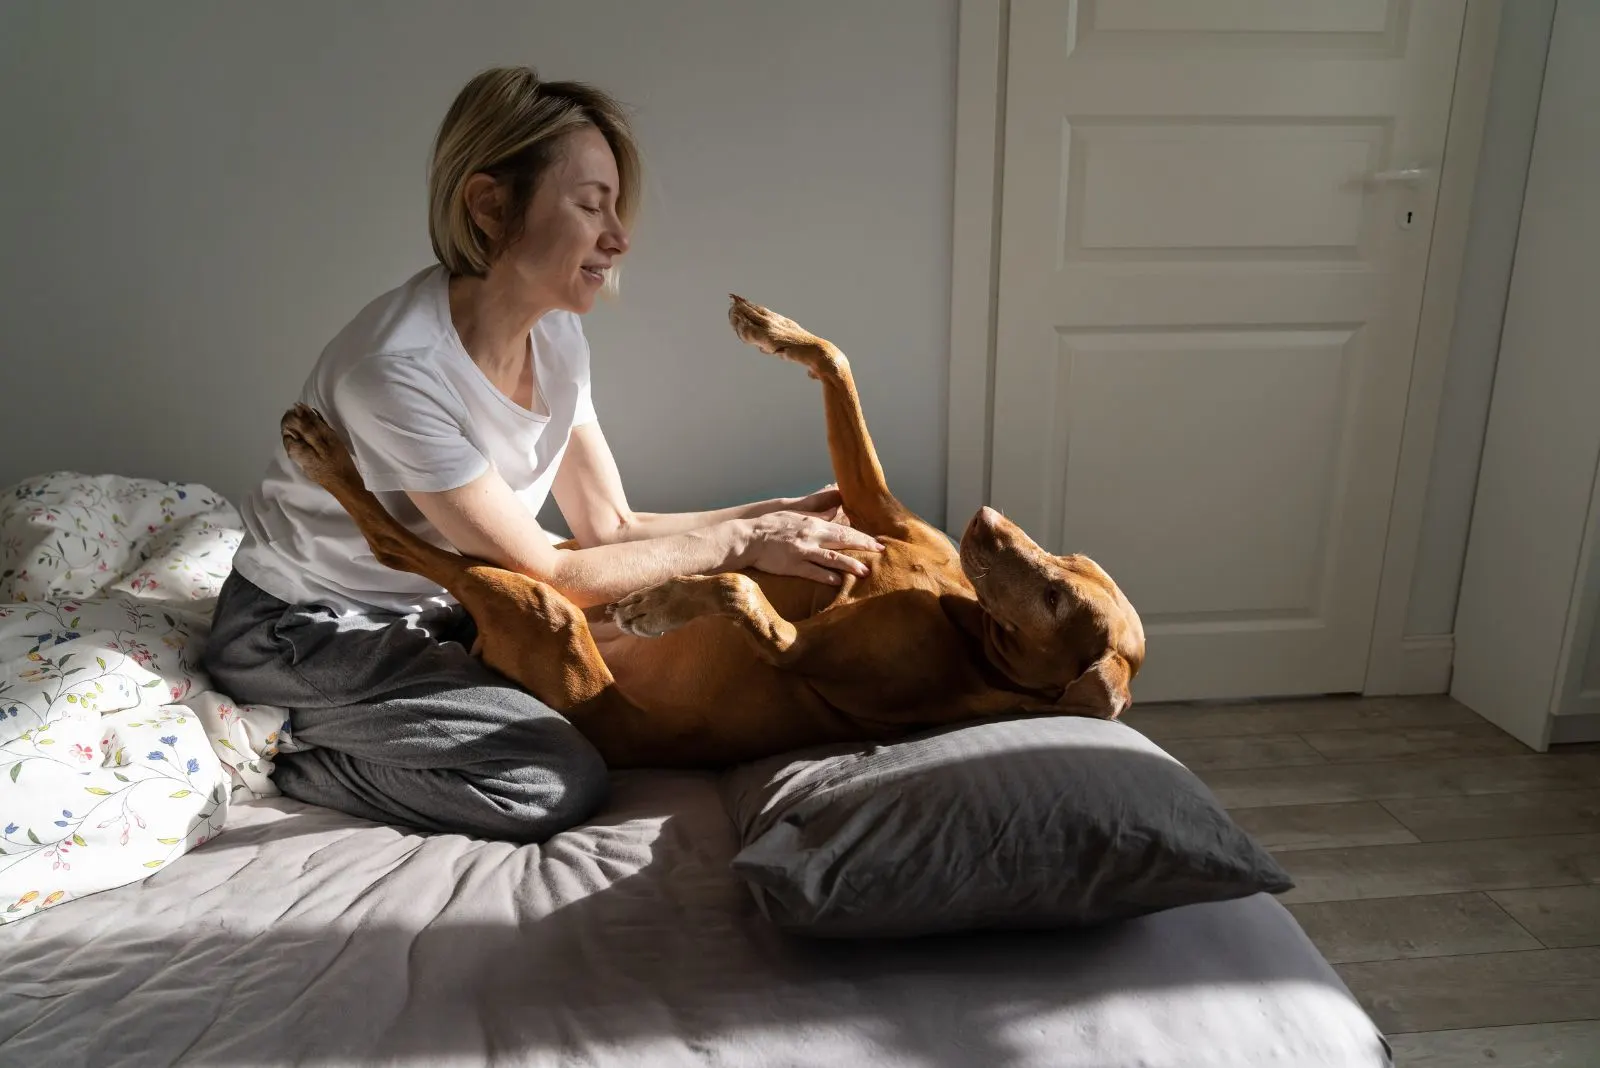 the girl strokes the dog's belly on the bed